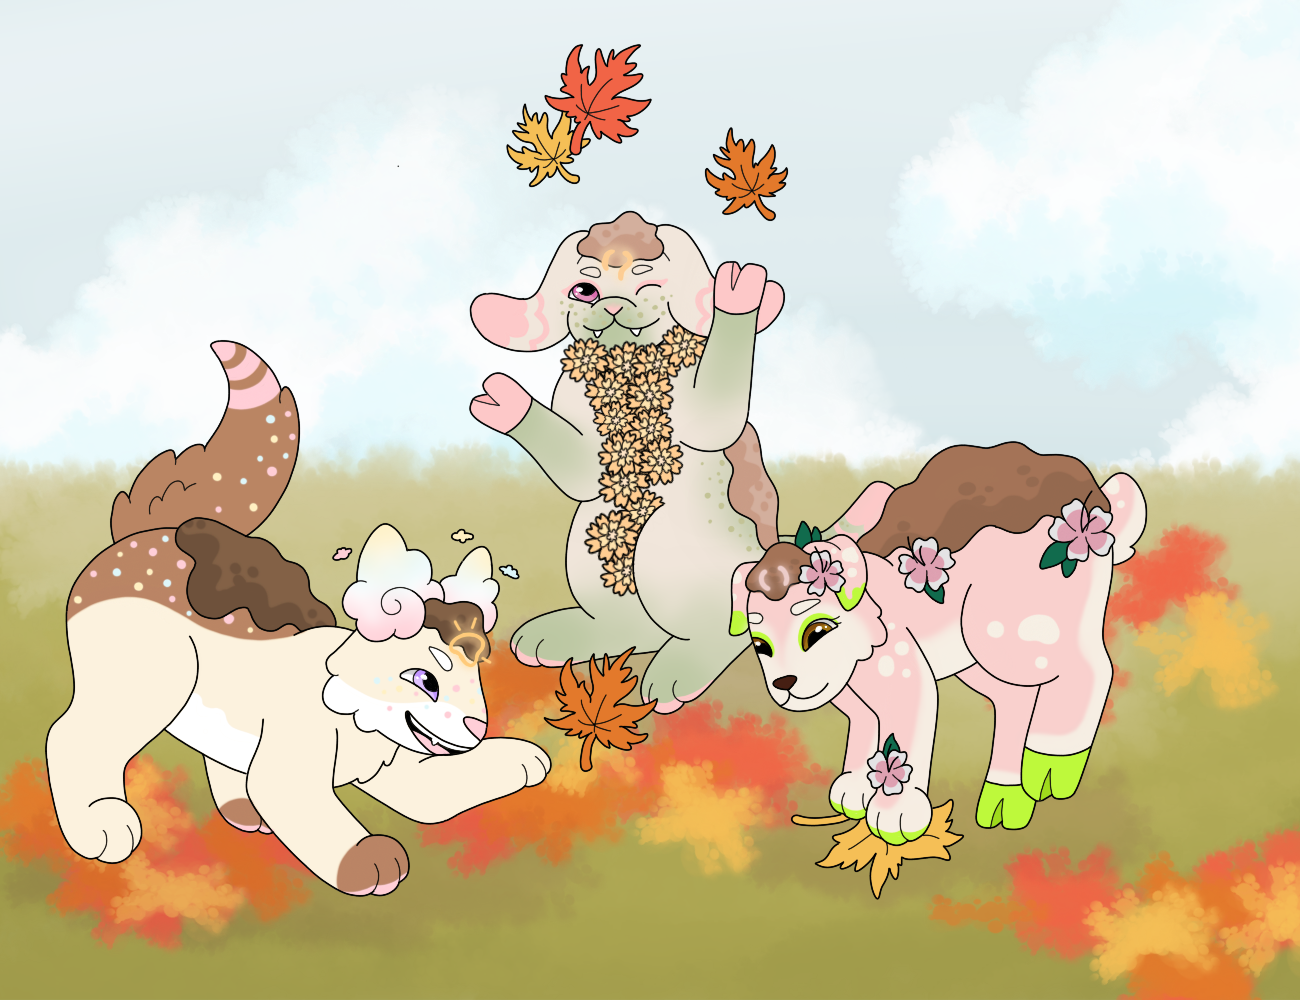 Frolicking in the Leaves